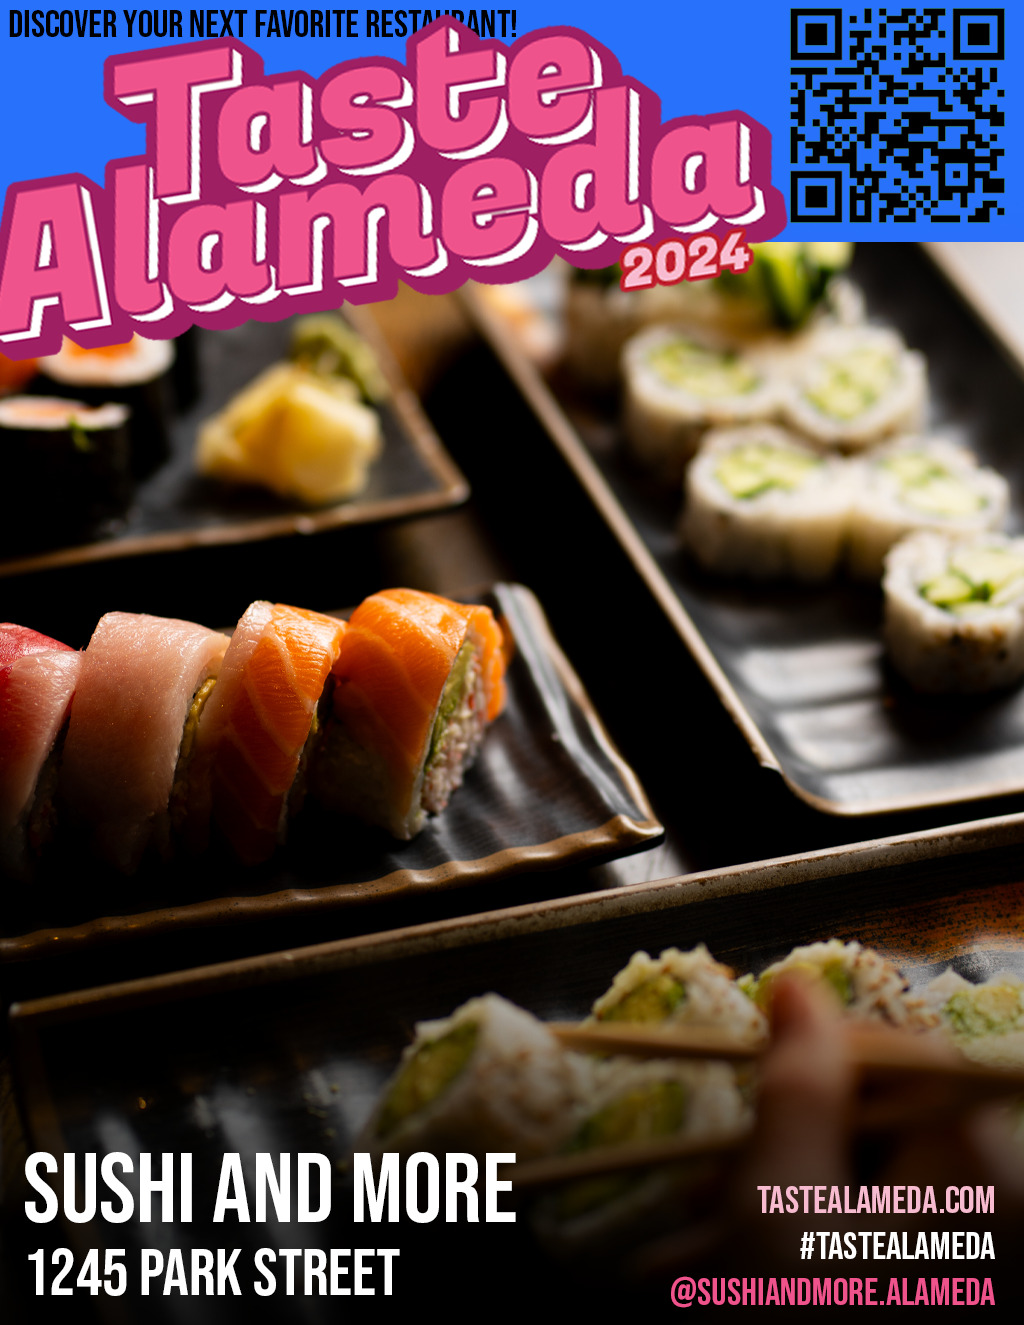 Studio 23 Gallery Discover the Best Sushi and More at Taste Alameda in 2024 promotion flier on Digifli com